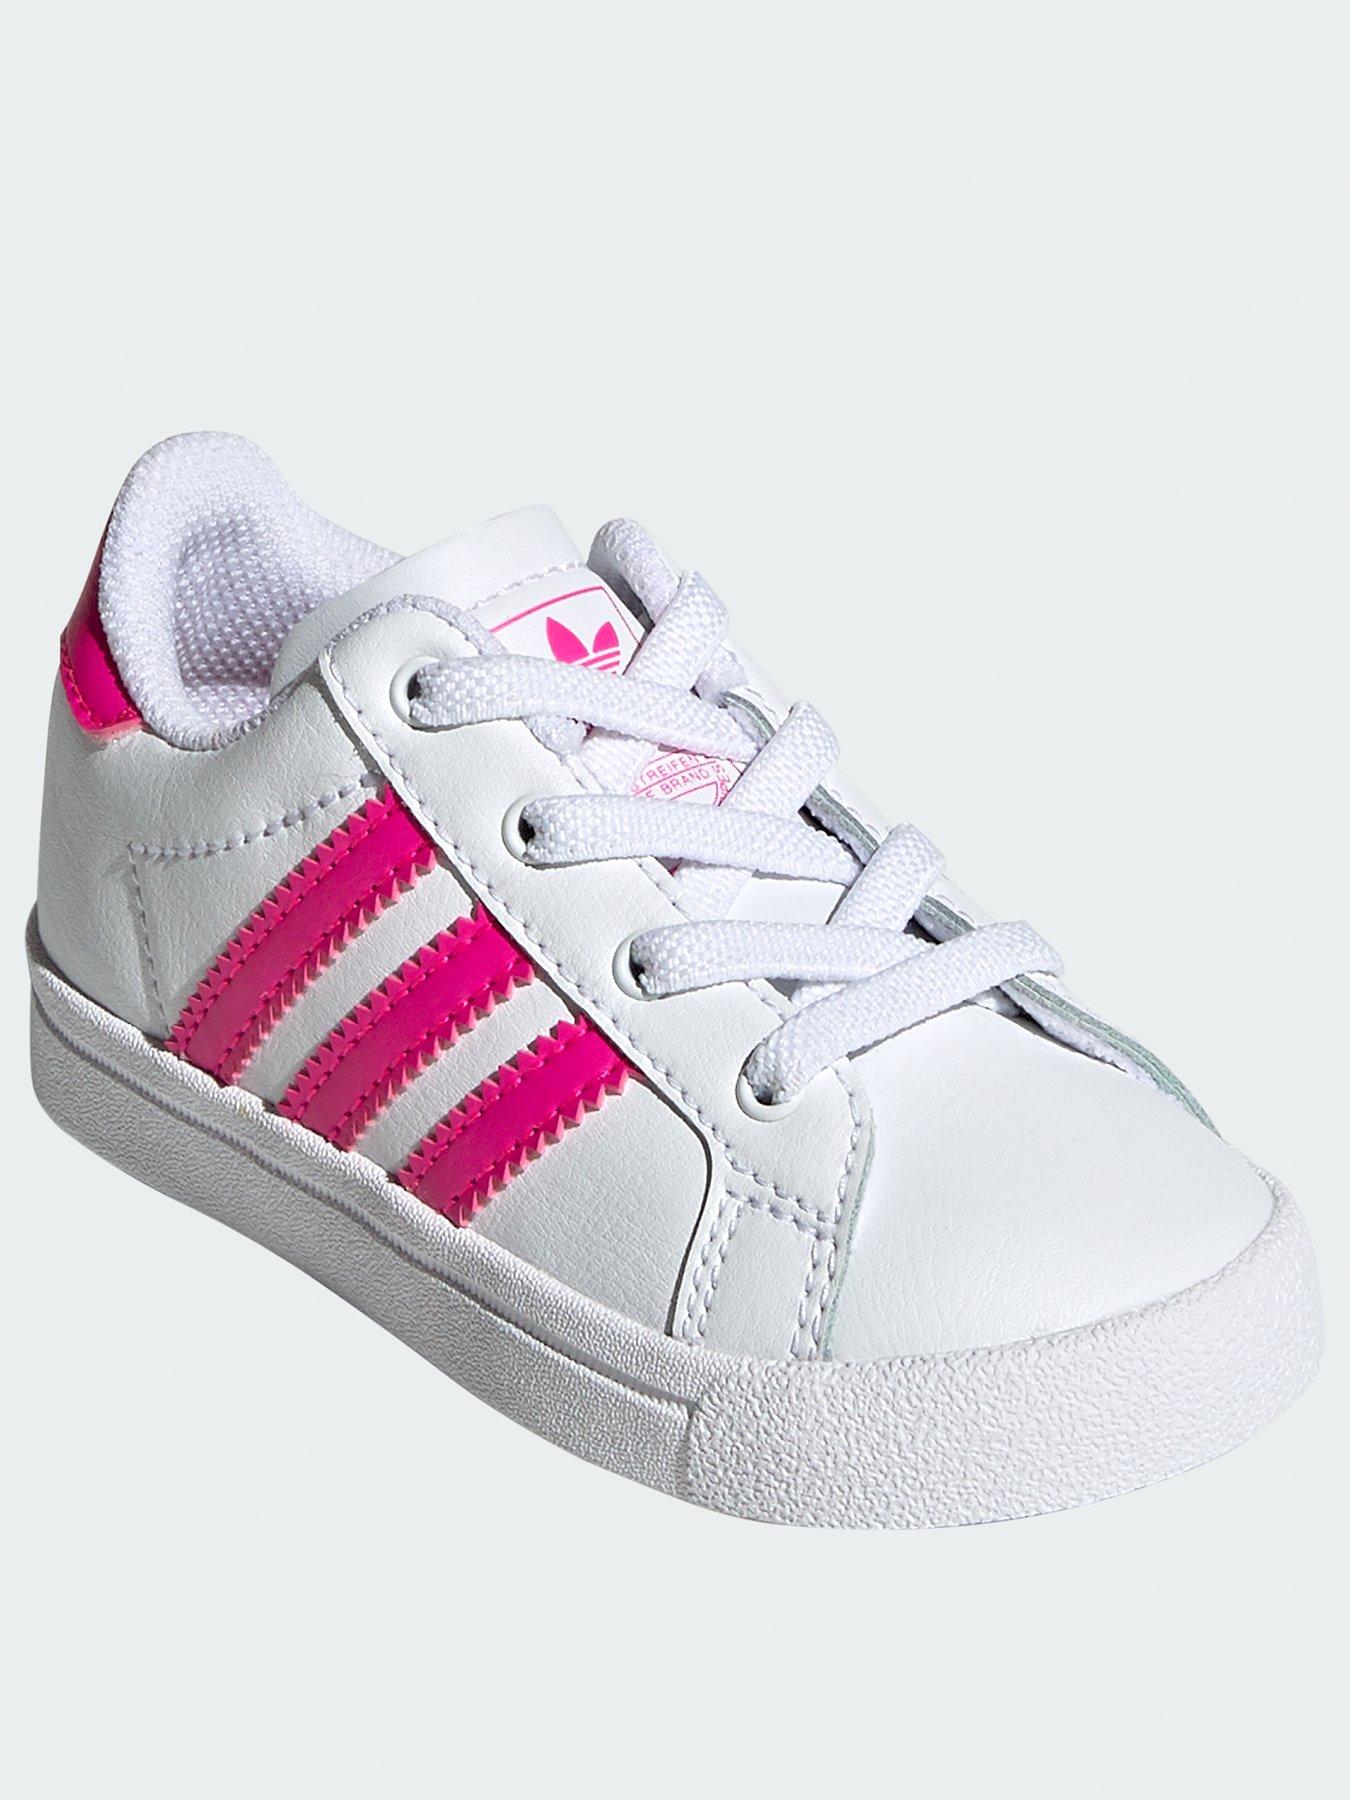 pink adidas infant trainers